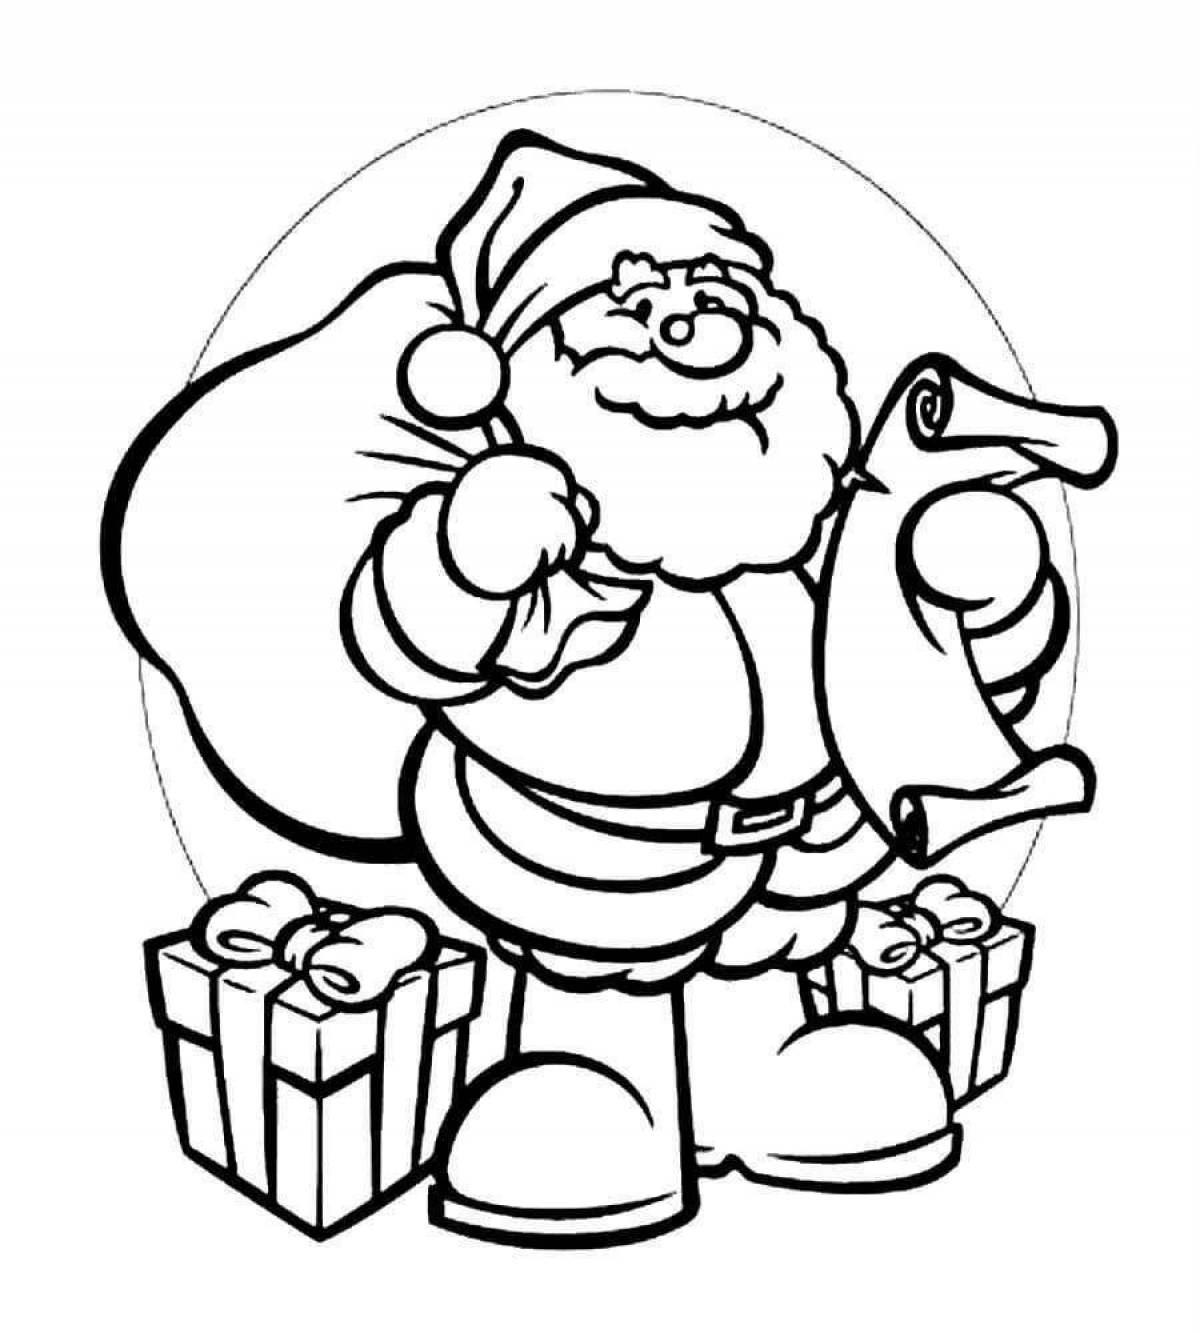 Glittering santa claus coloring book for kids